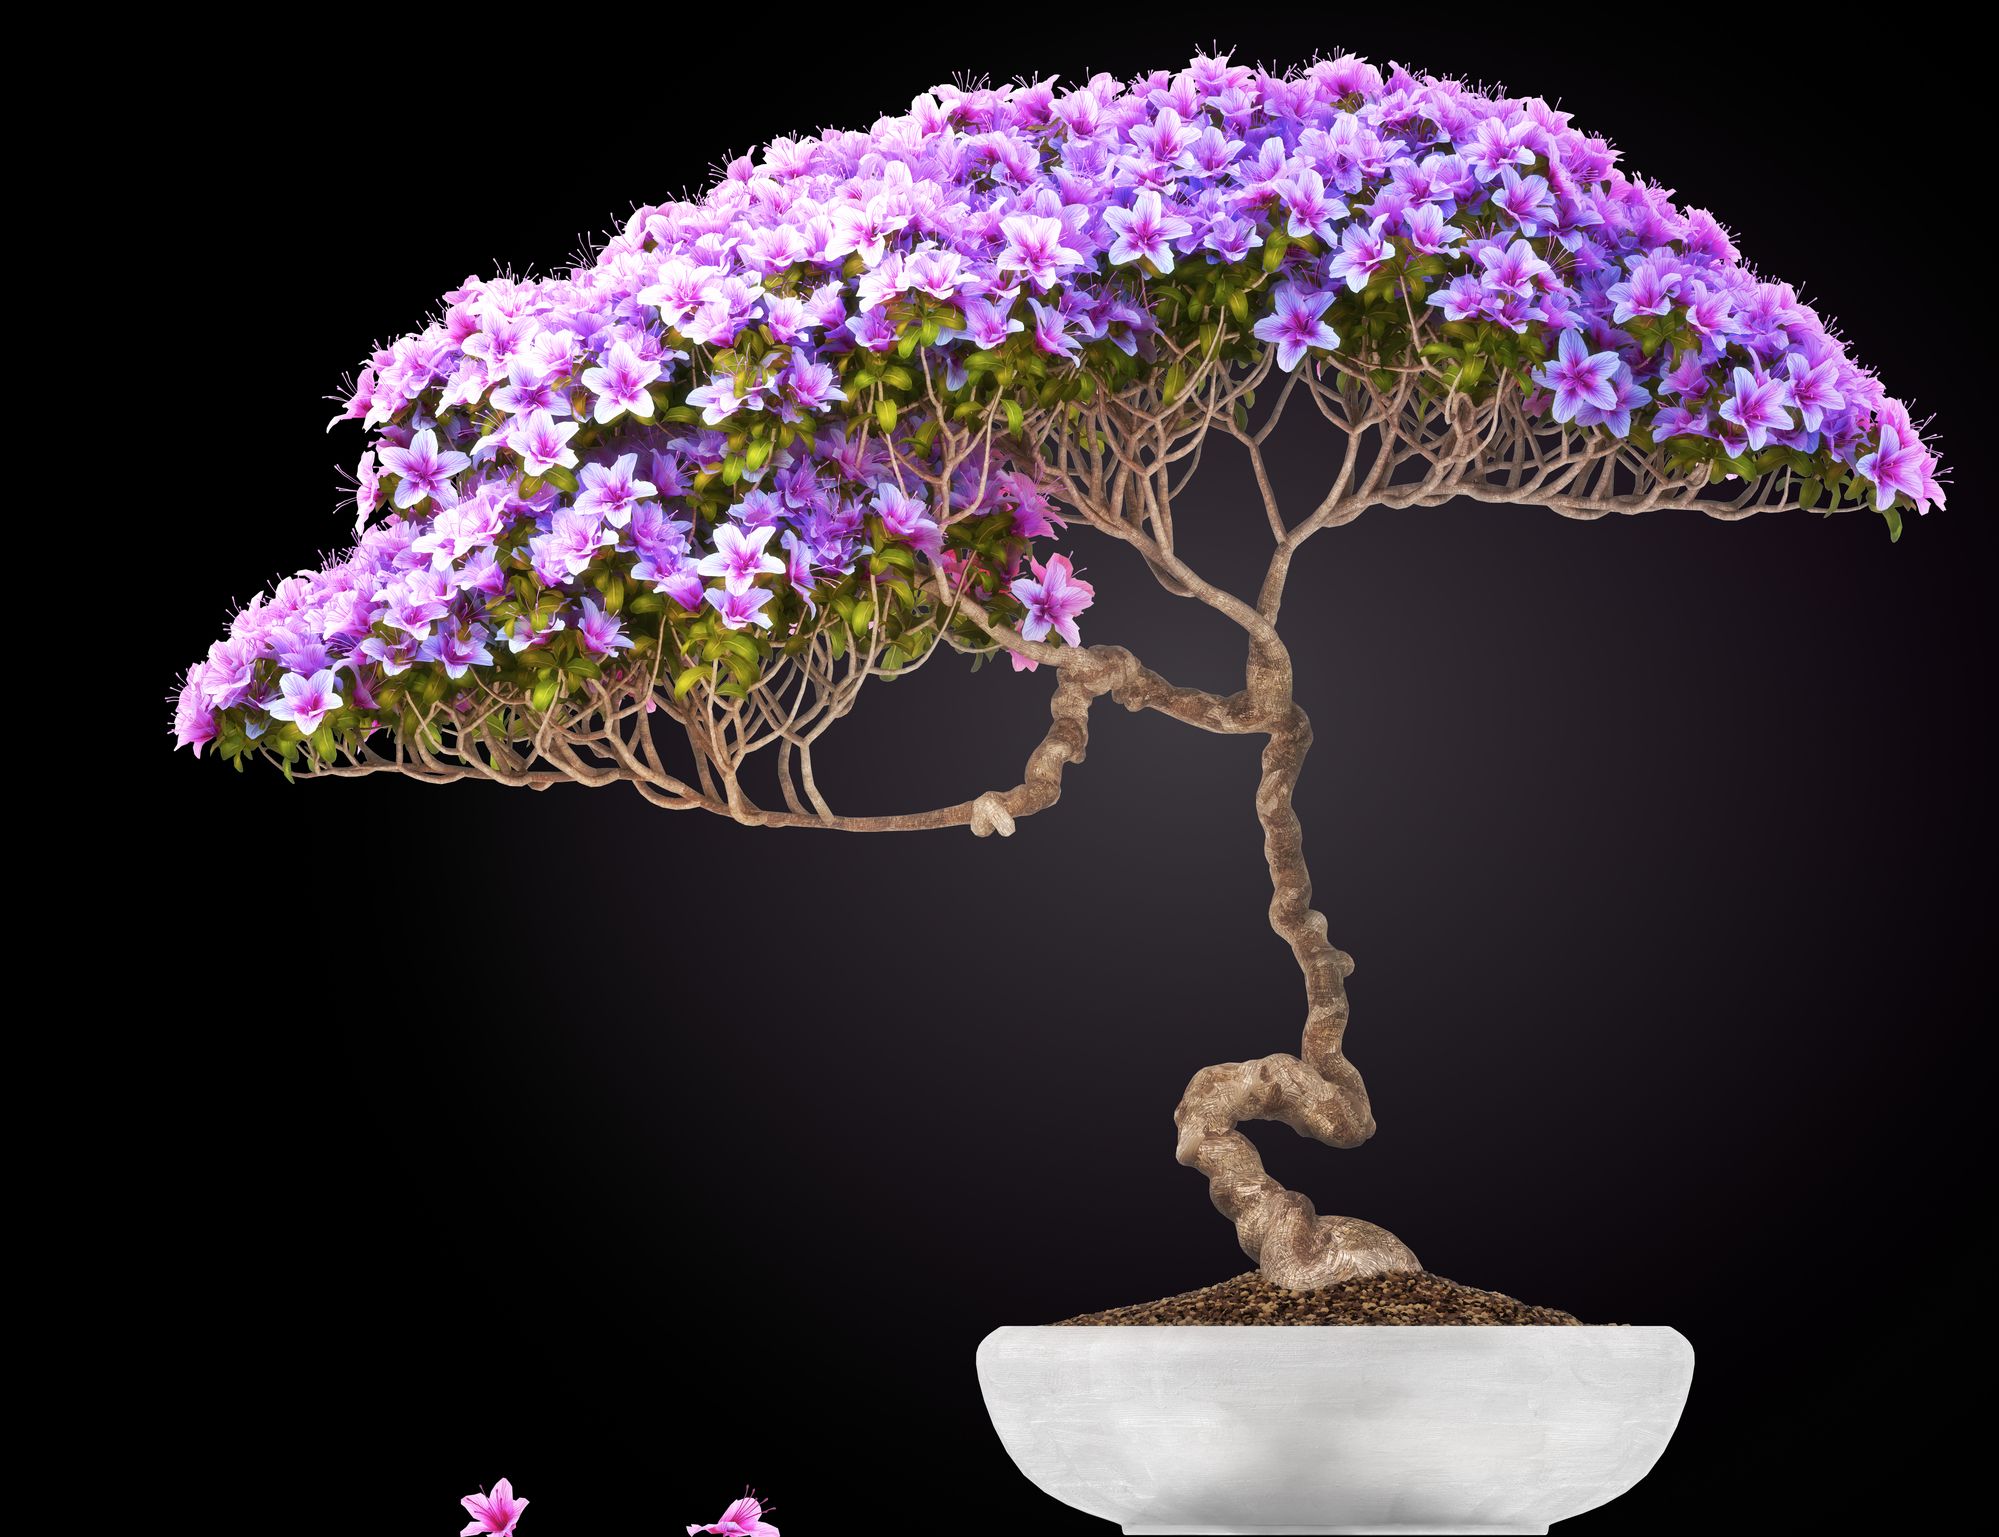 Twisted trunk of purple flowering bonsai tree planted in a rounded white pot